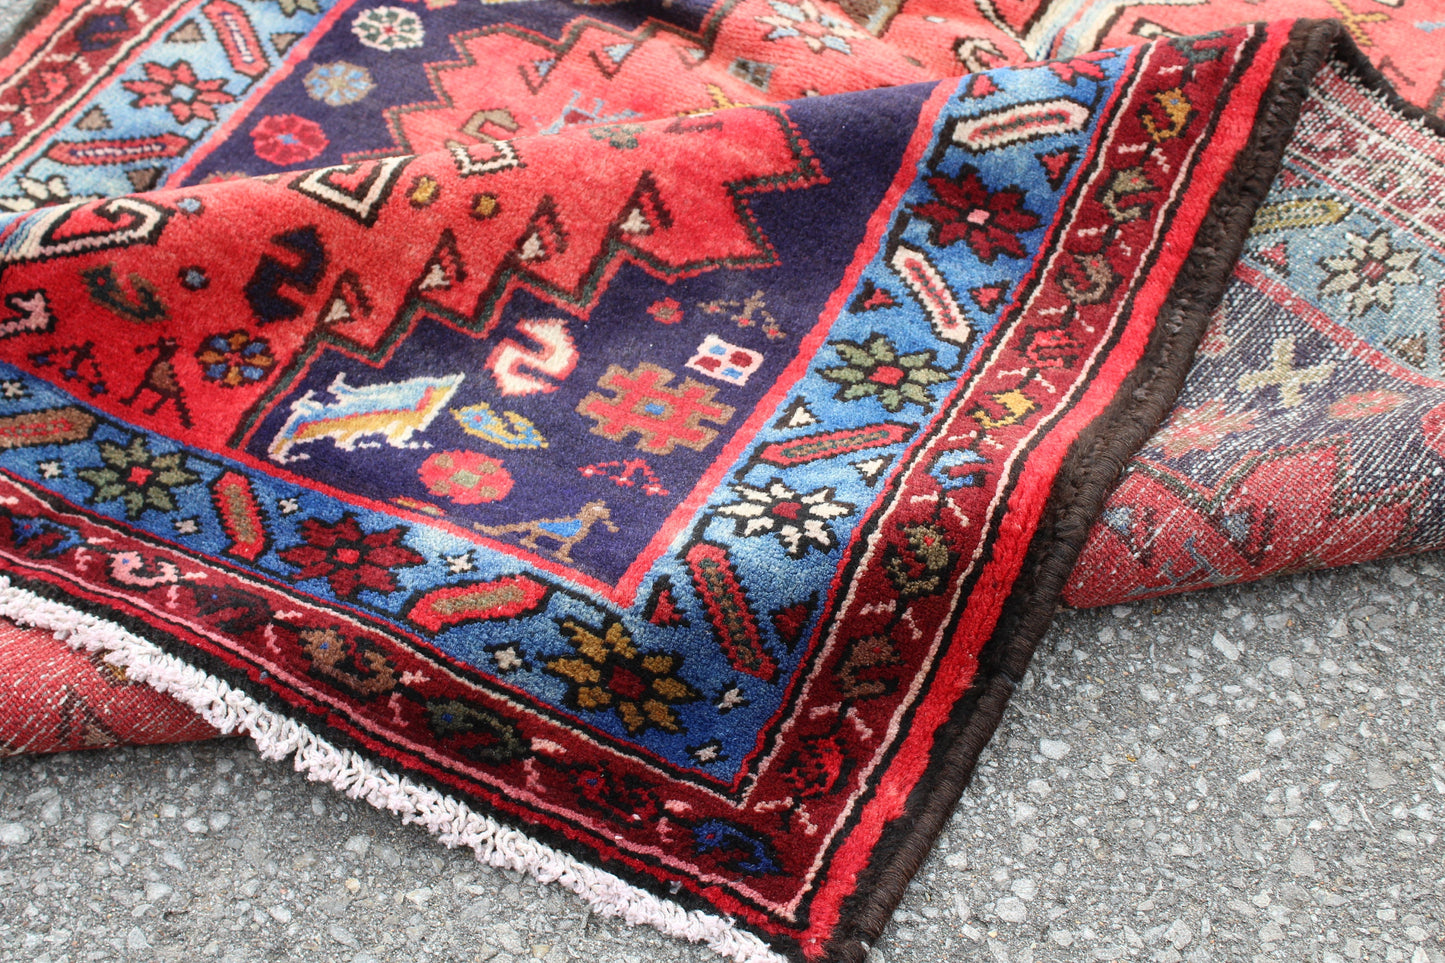 Coral Persian 3'5" x 6'5" Rug with Blue and Navy Border